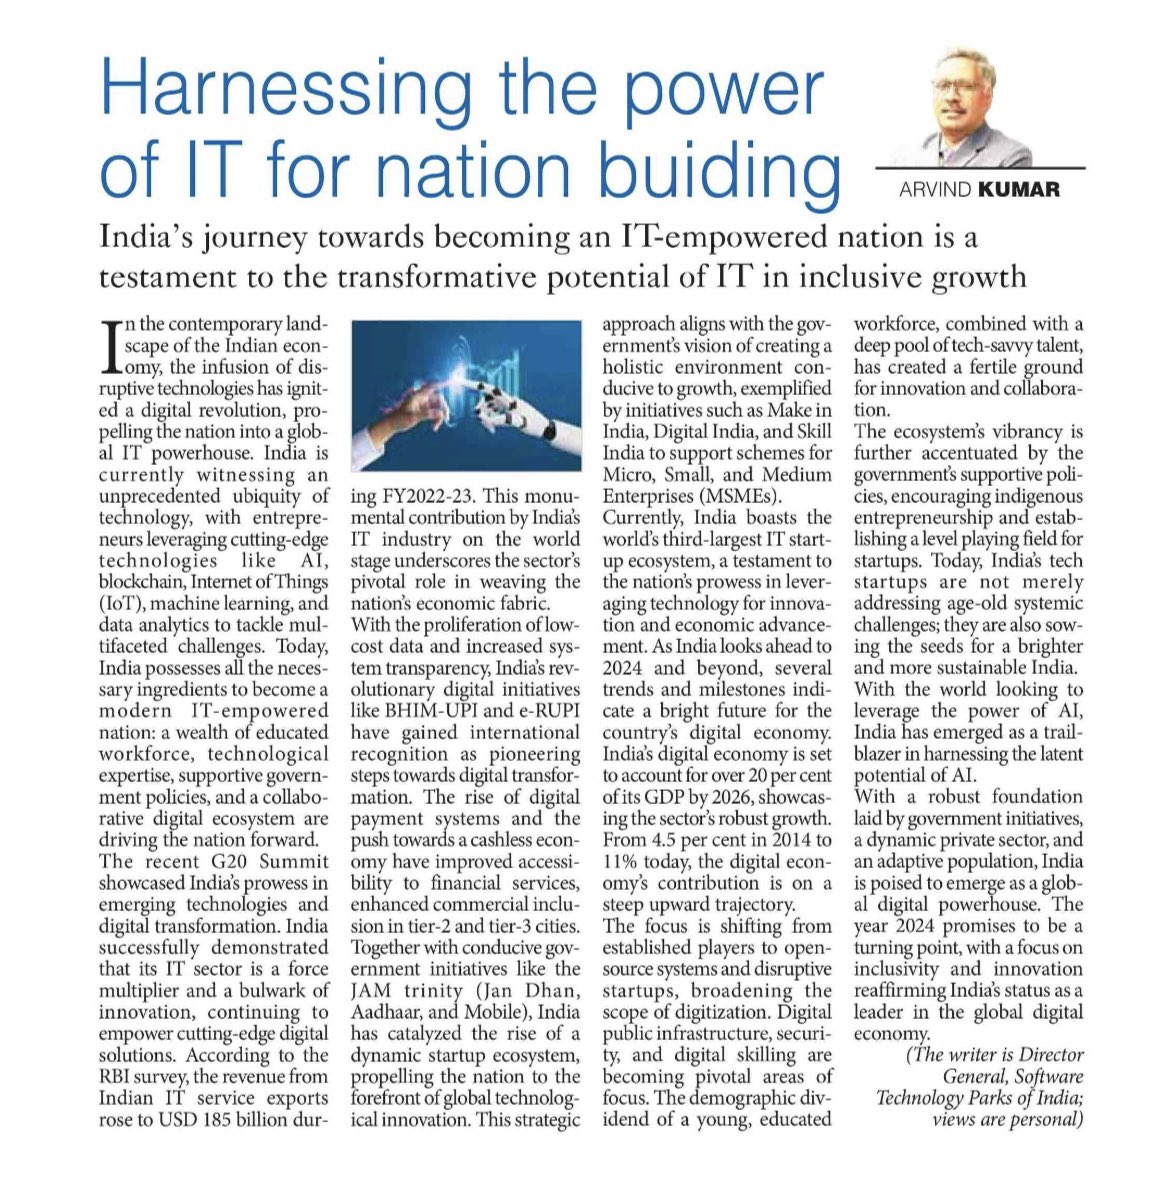 With a robust foundation laid by government initiatives, a dynamic private sector, and an adaptive population, India is poised to emerge as a global digital powerhouse. My article published today in @TheDailyPioneer